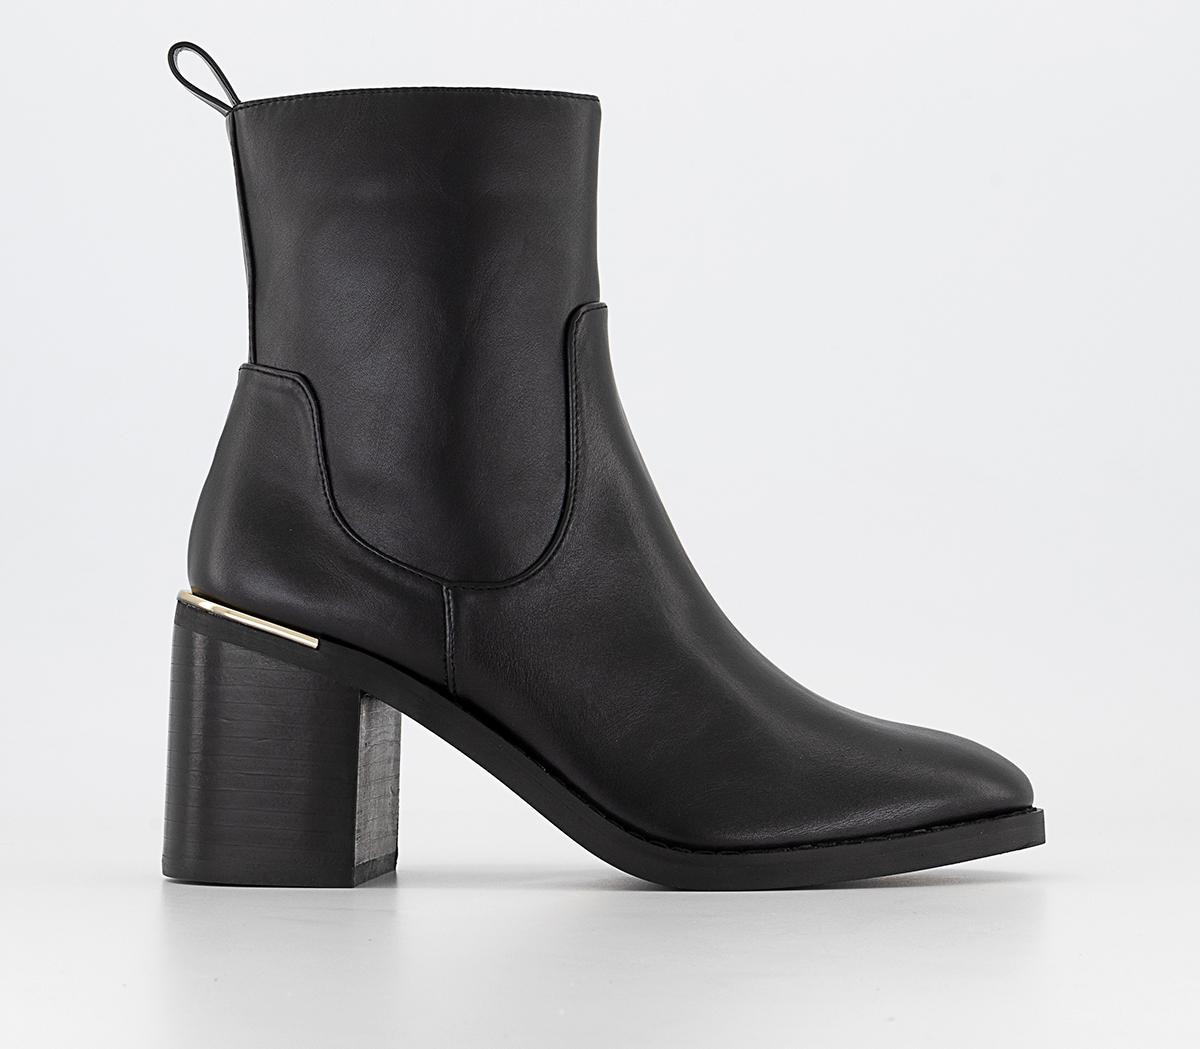 OFFICE Appleton Chunky Heel Ankle Boots Black - Women's Ankle Boots